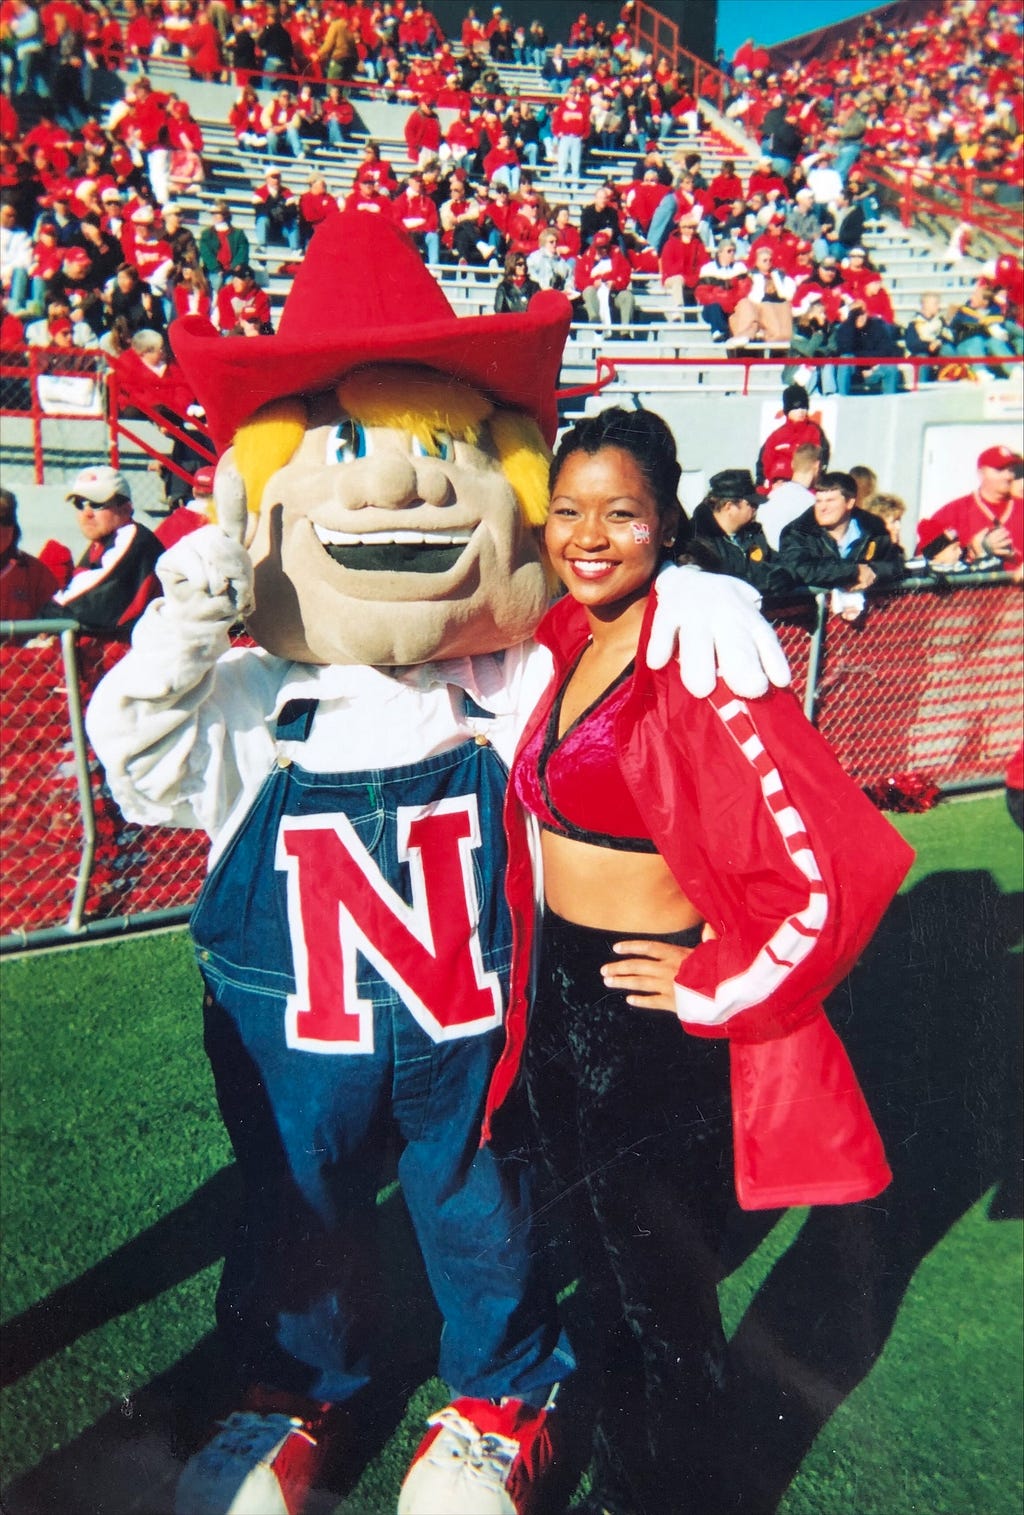 A photo of Erynn during her time as a Husker cheerleader